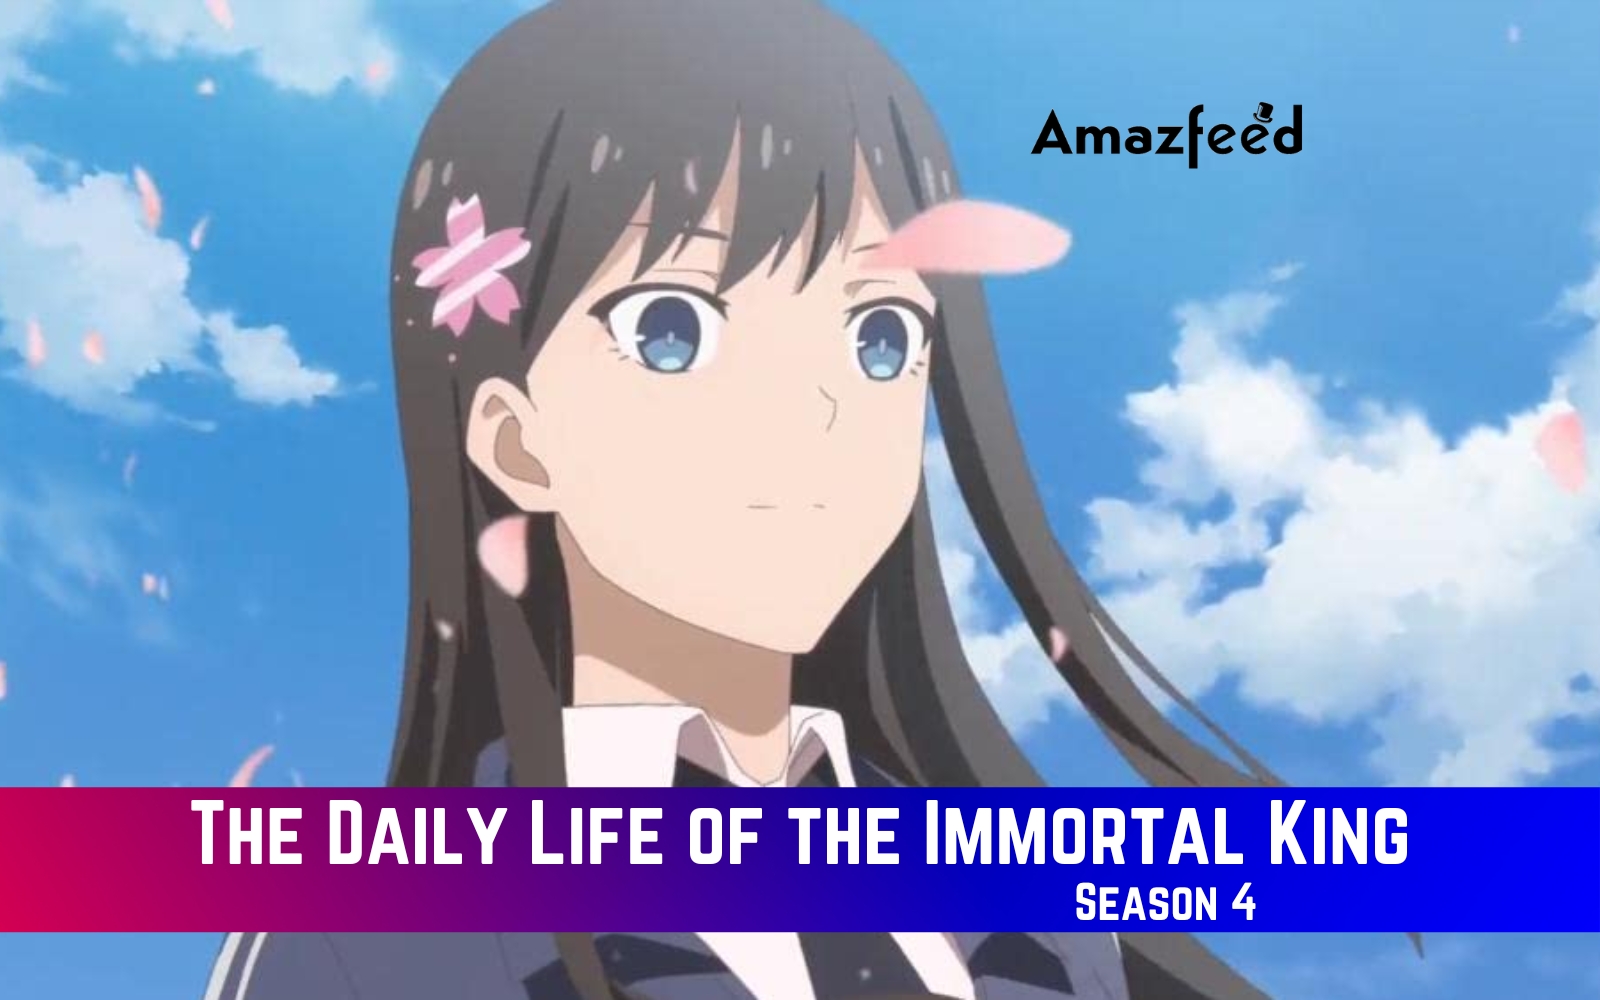 The Daily Life of the Immortal King' Season 4: Everything We Know So Far